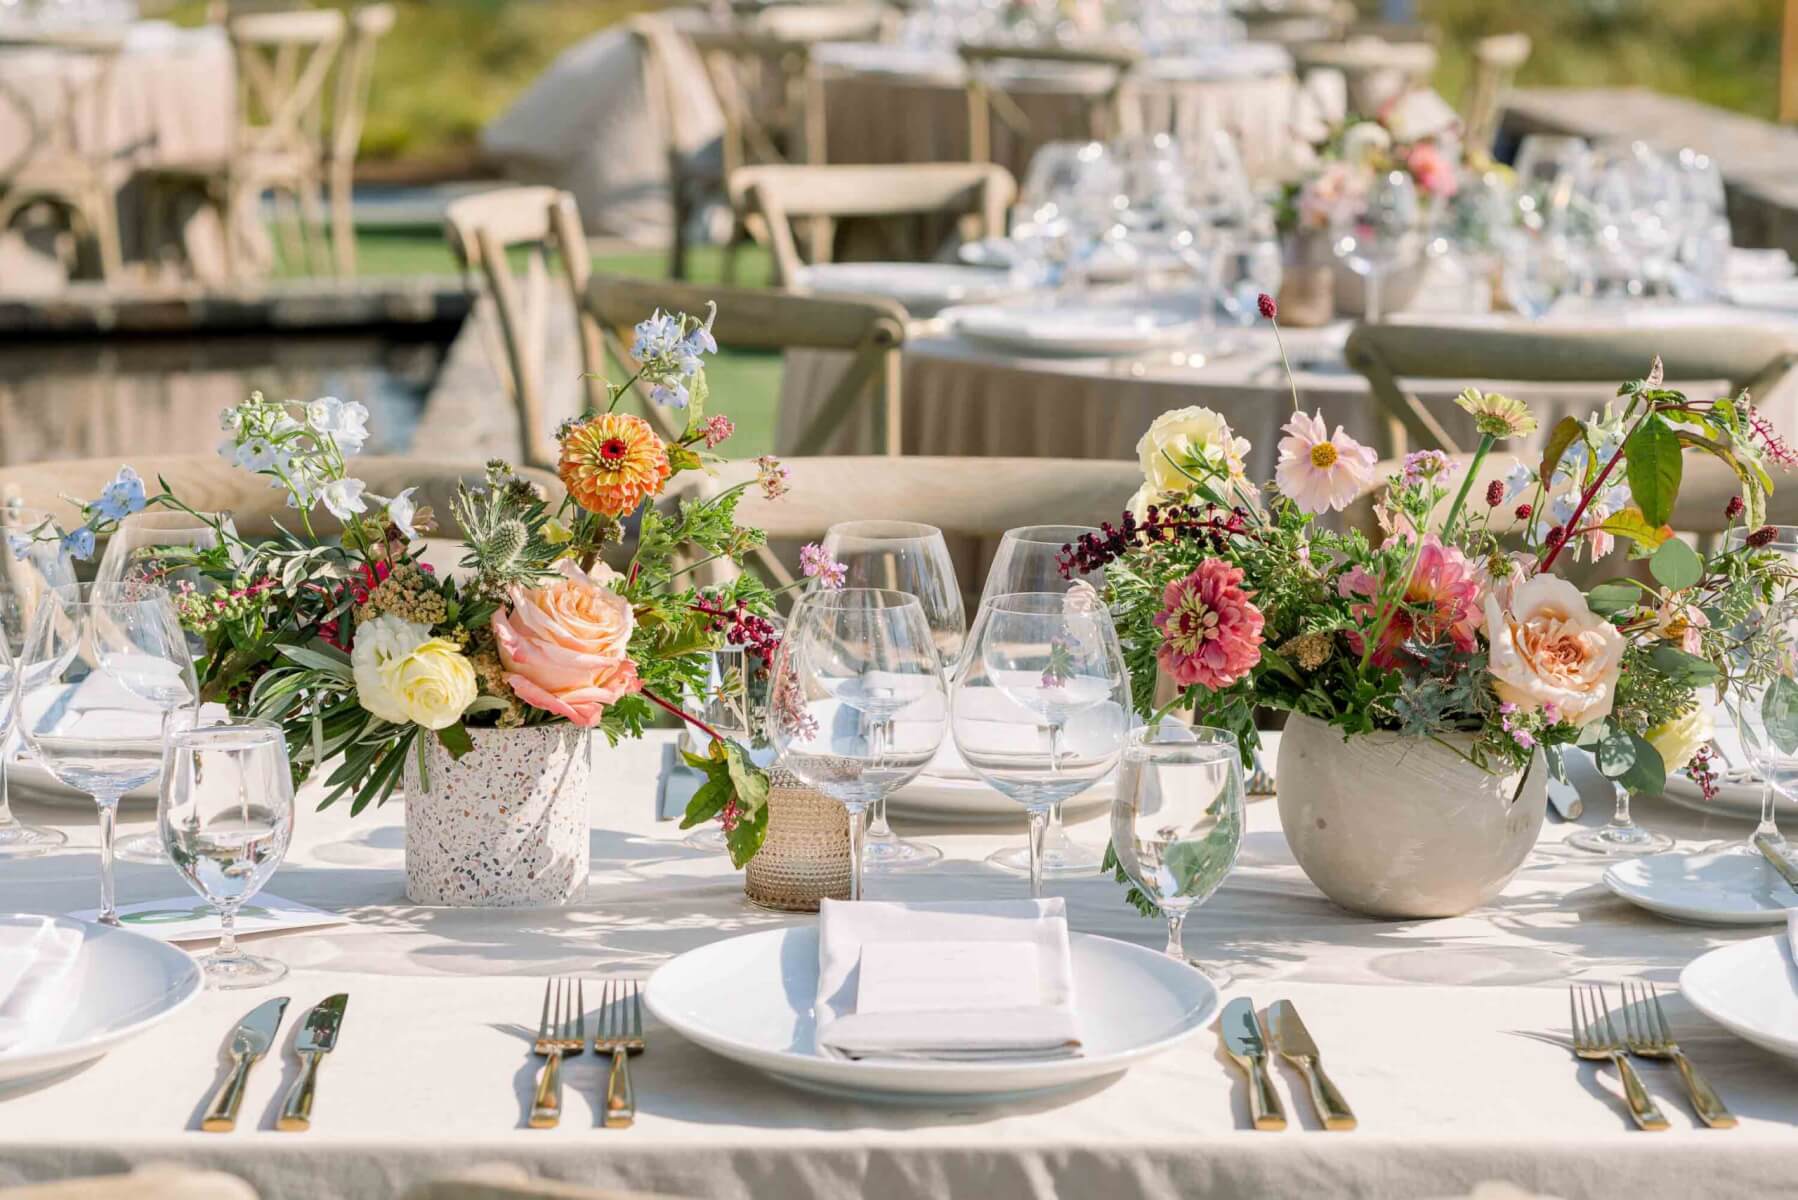 Outdoor wedding tables set with bouquets in vases.